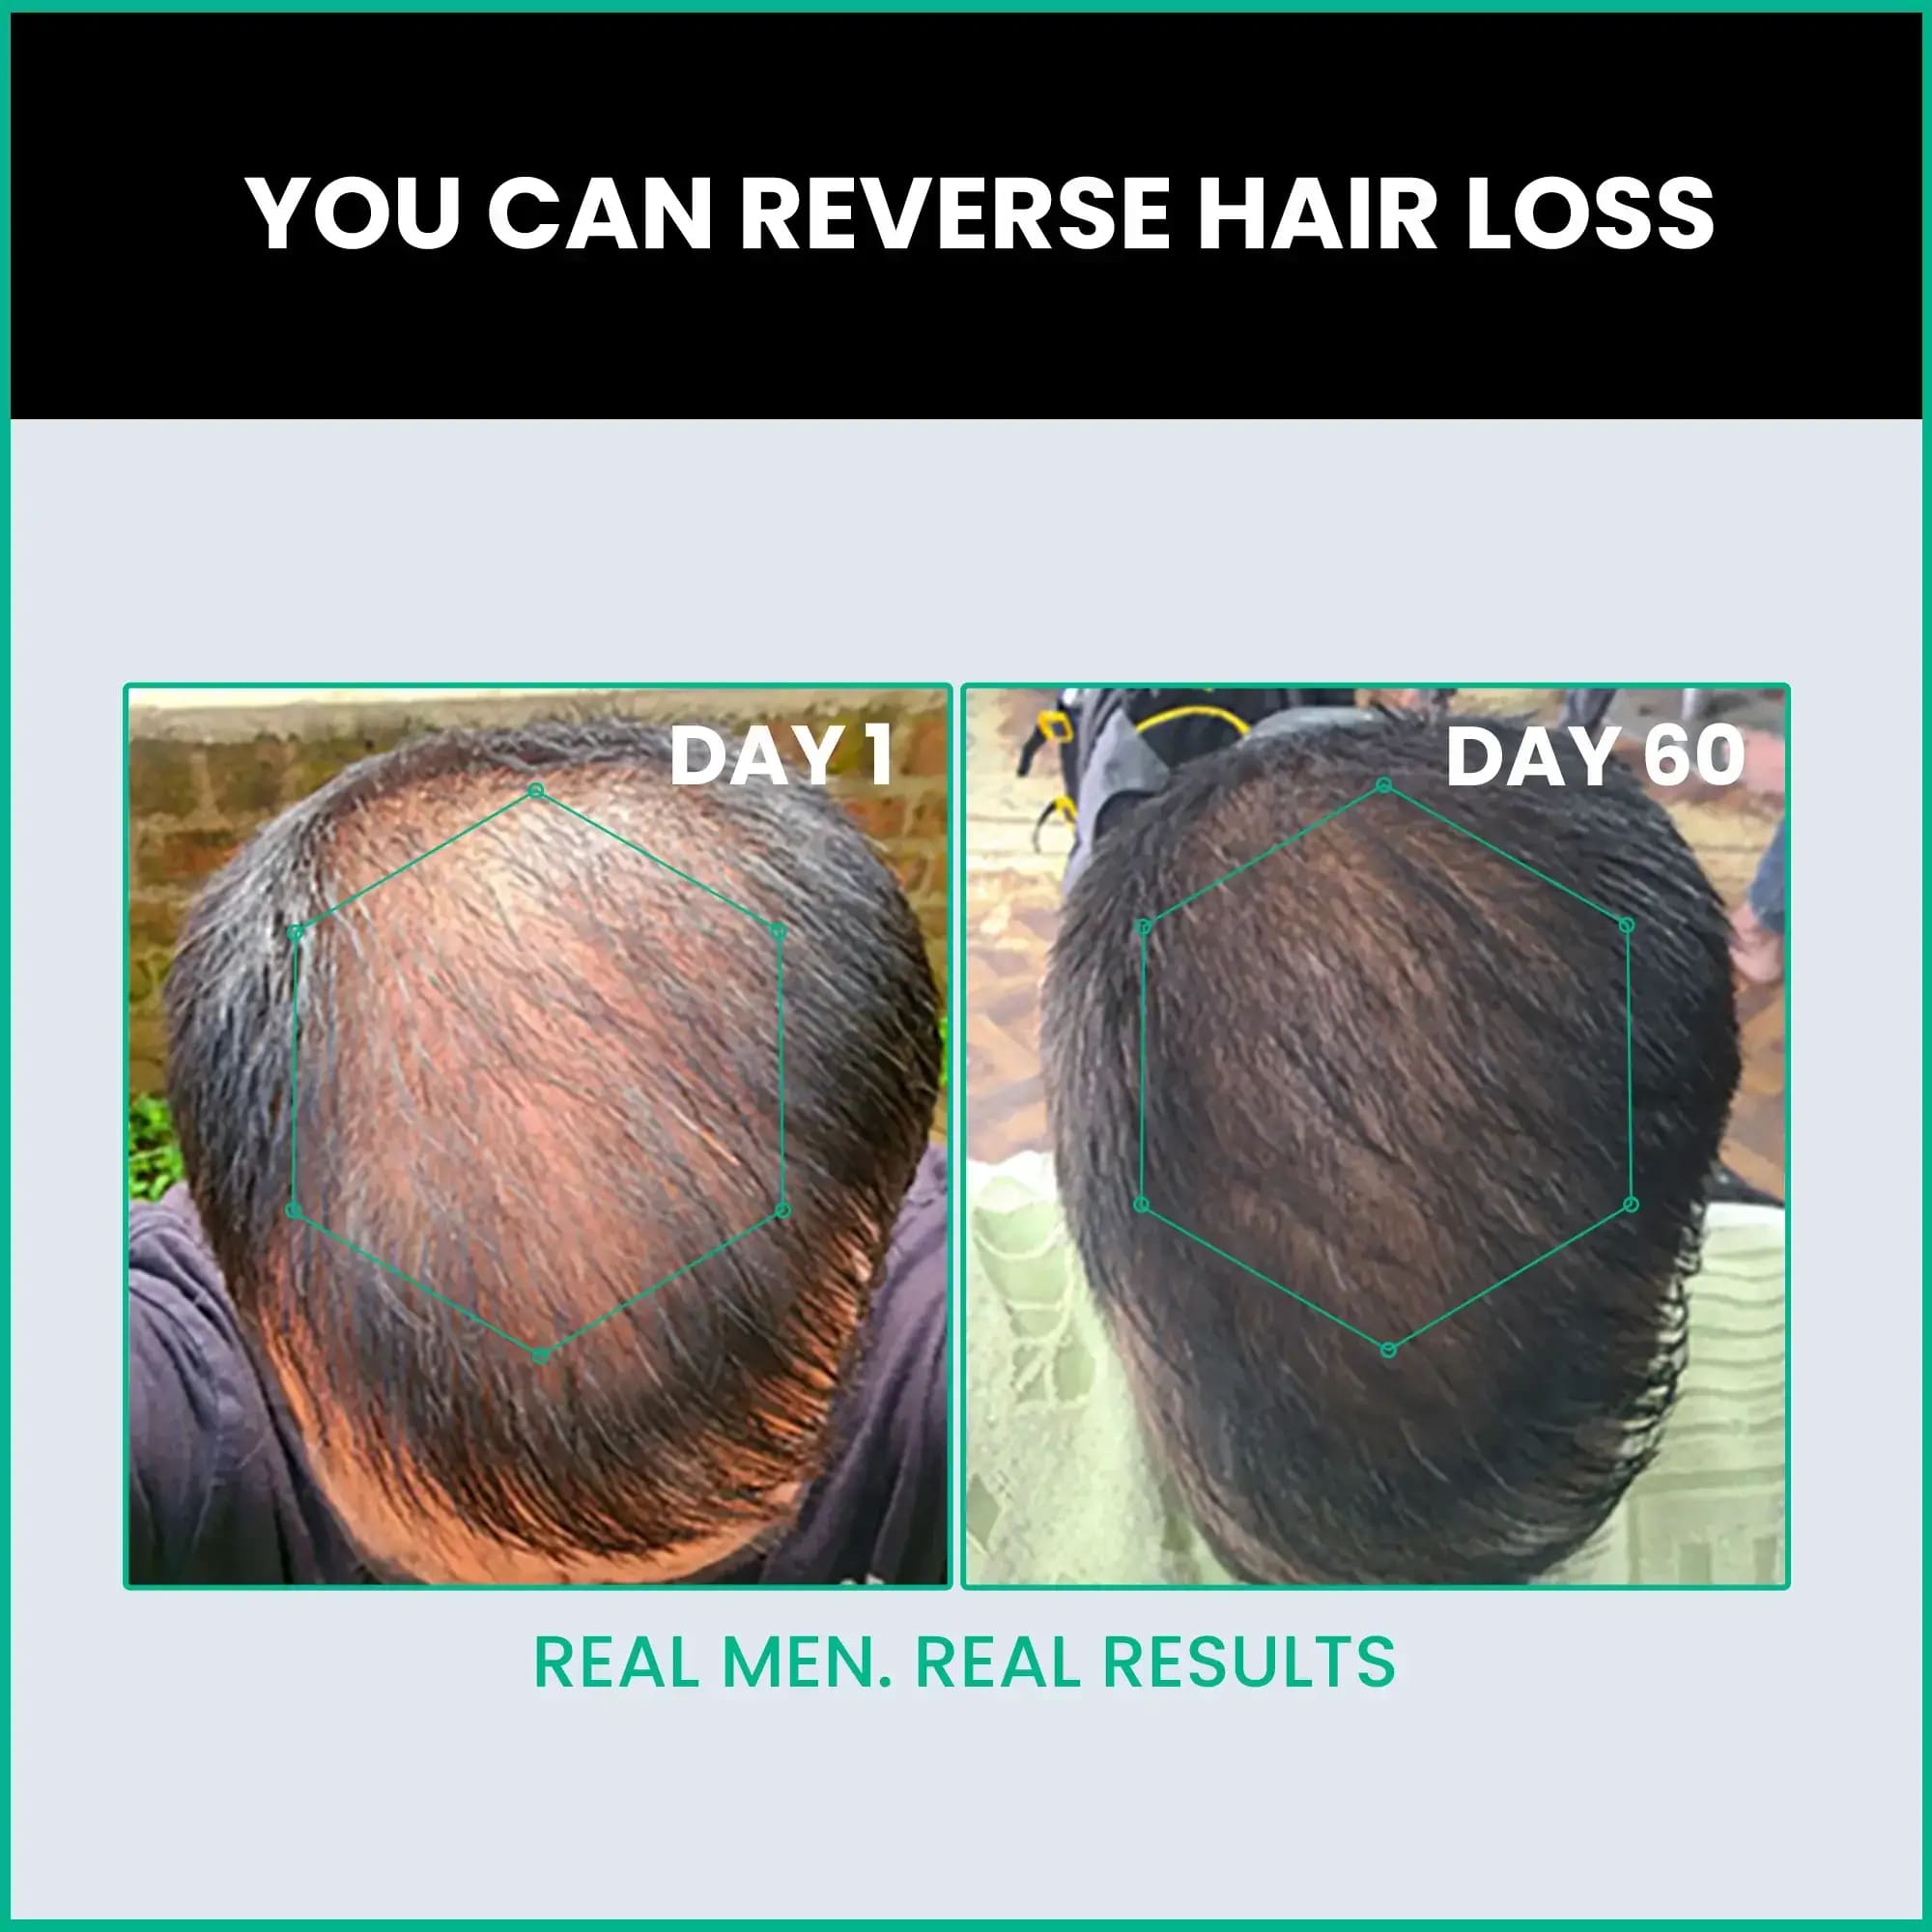 Regrow Your Hair in 60 Days with Hair Growth Serum - Gurgaon Other